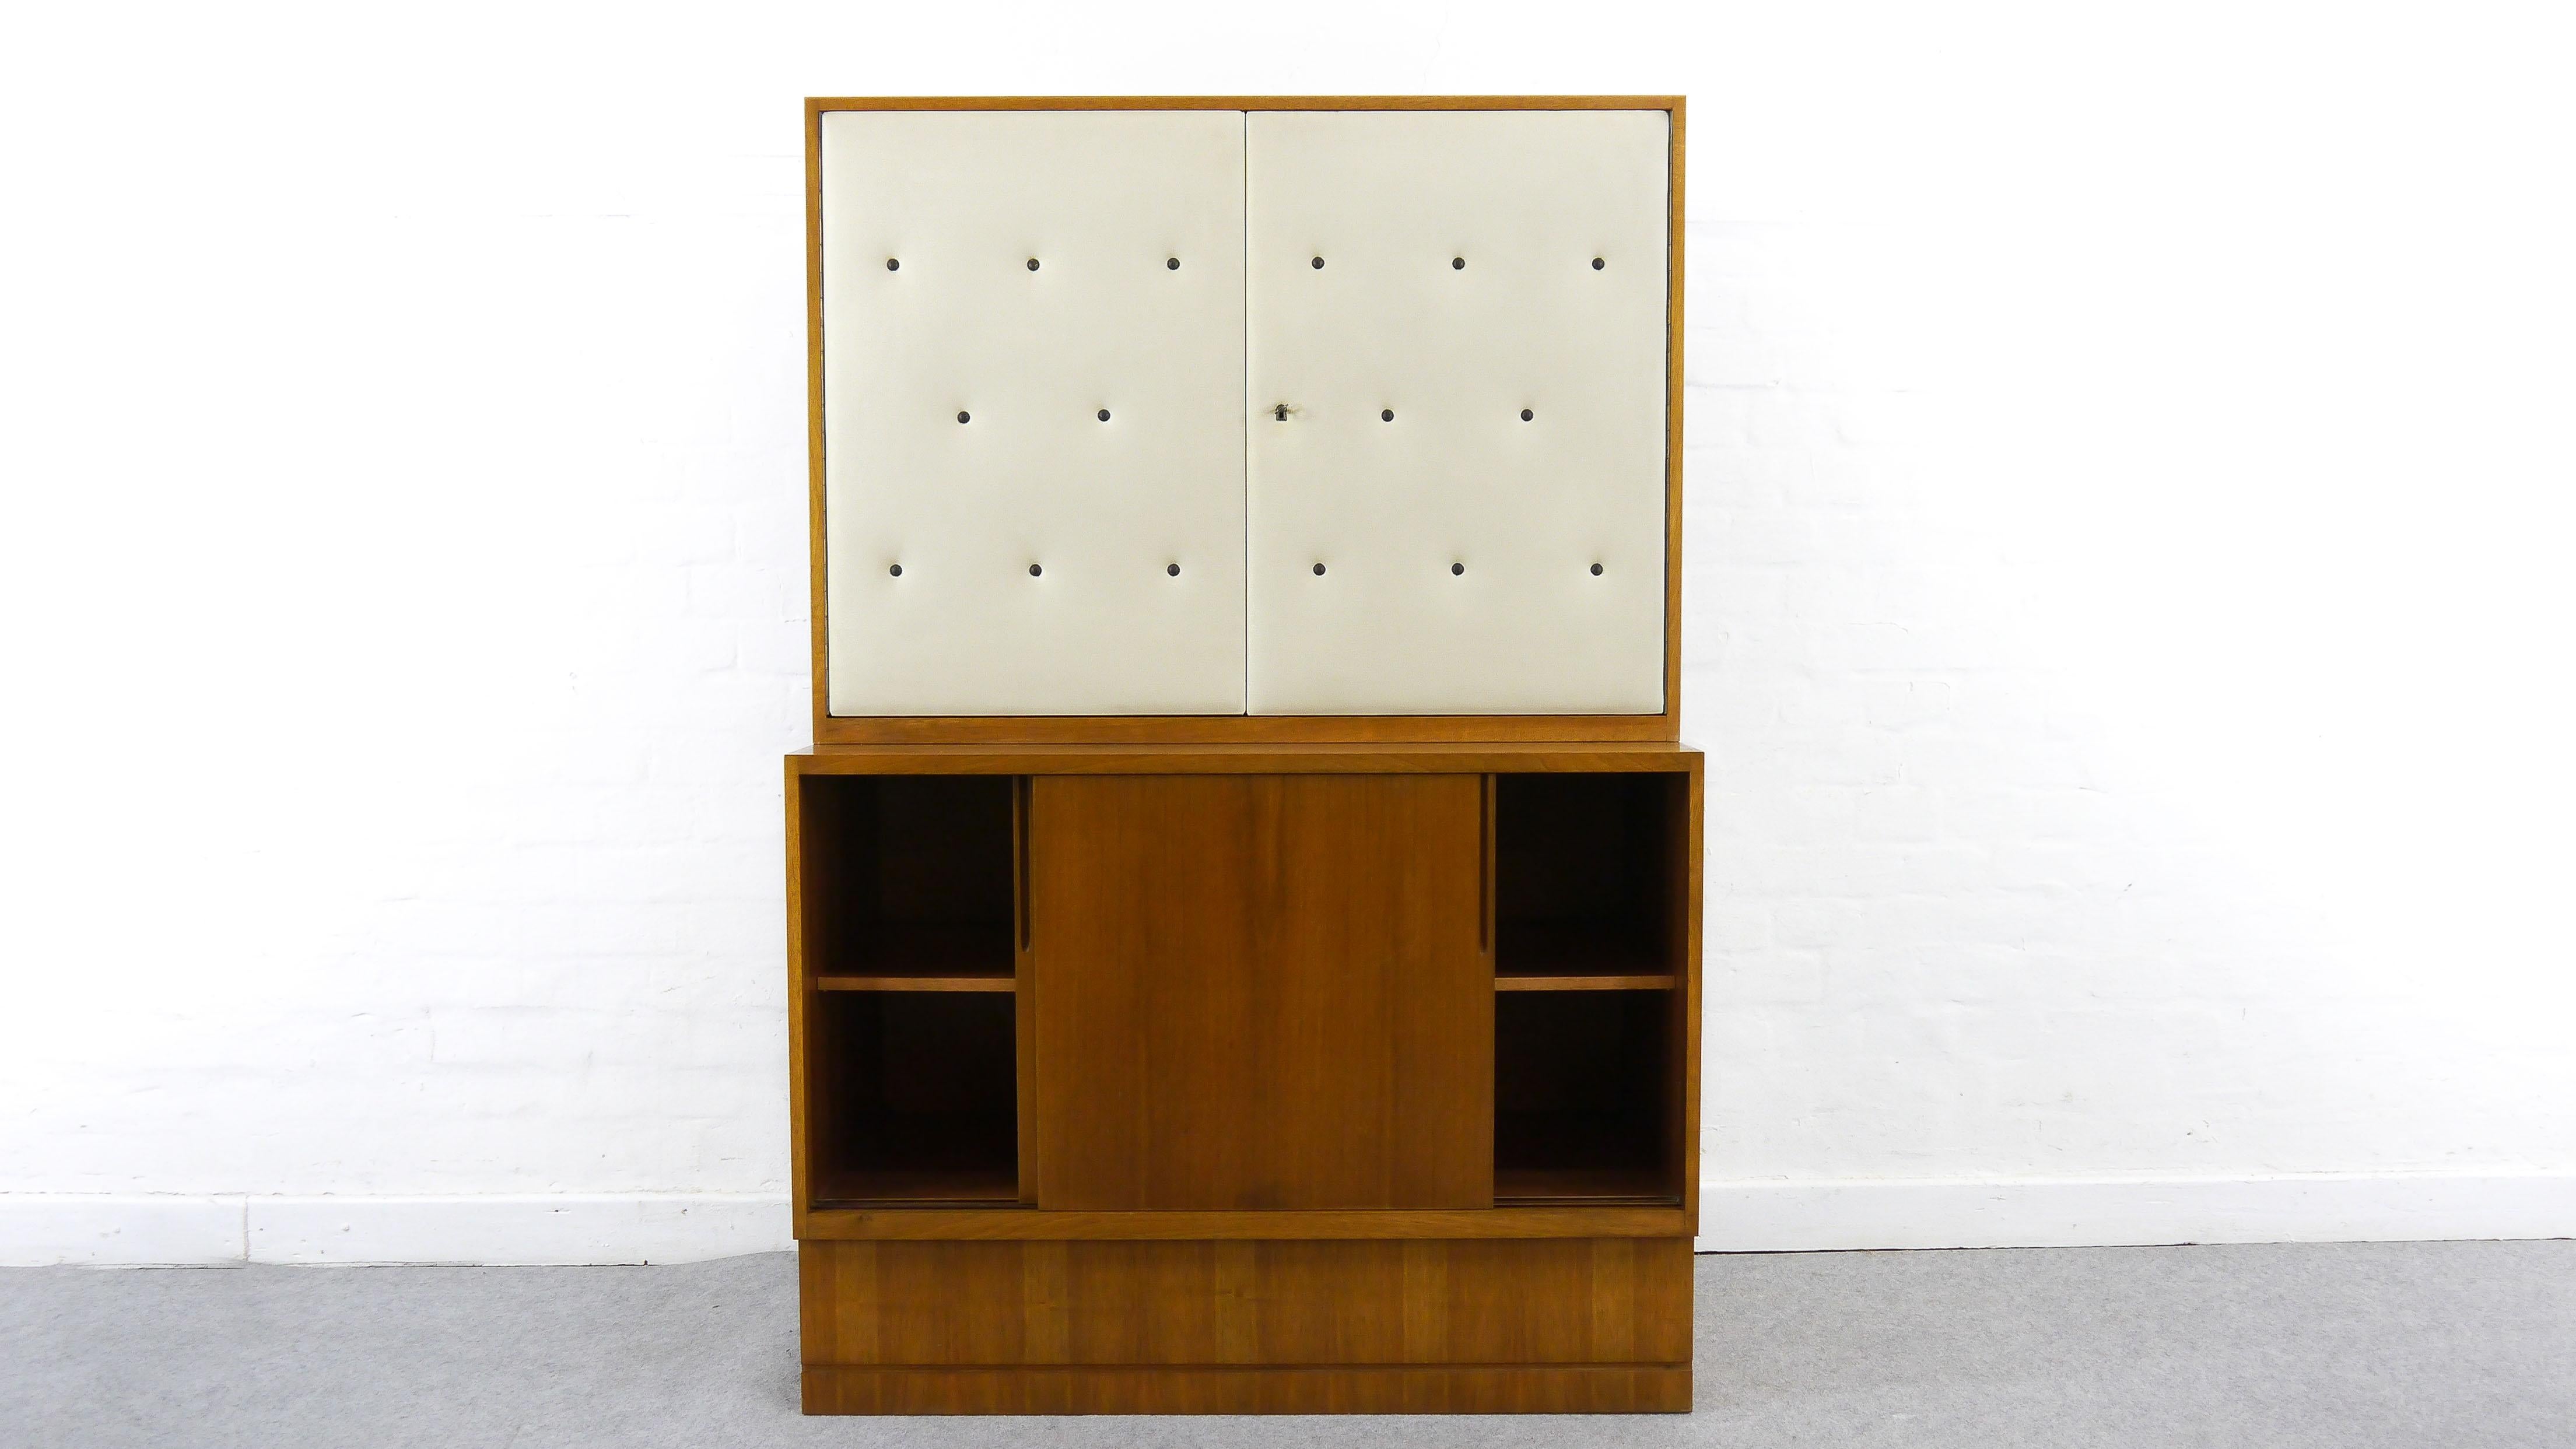 Bauhaus-pupil Franz Ehrlich designed this furniture series in the early fifties for the VEB Deutsche Werkstätten Hellerau. Barelement with 2 doors, mirrored and with stone/glass inside. Sideboard with two sliding doors.
Measurements: Sideboard: W